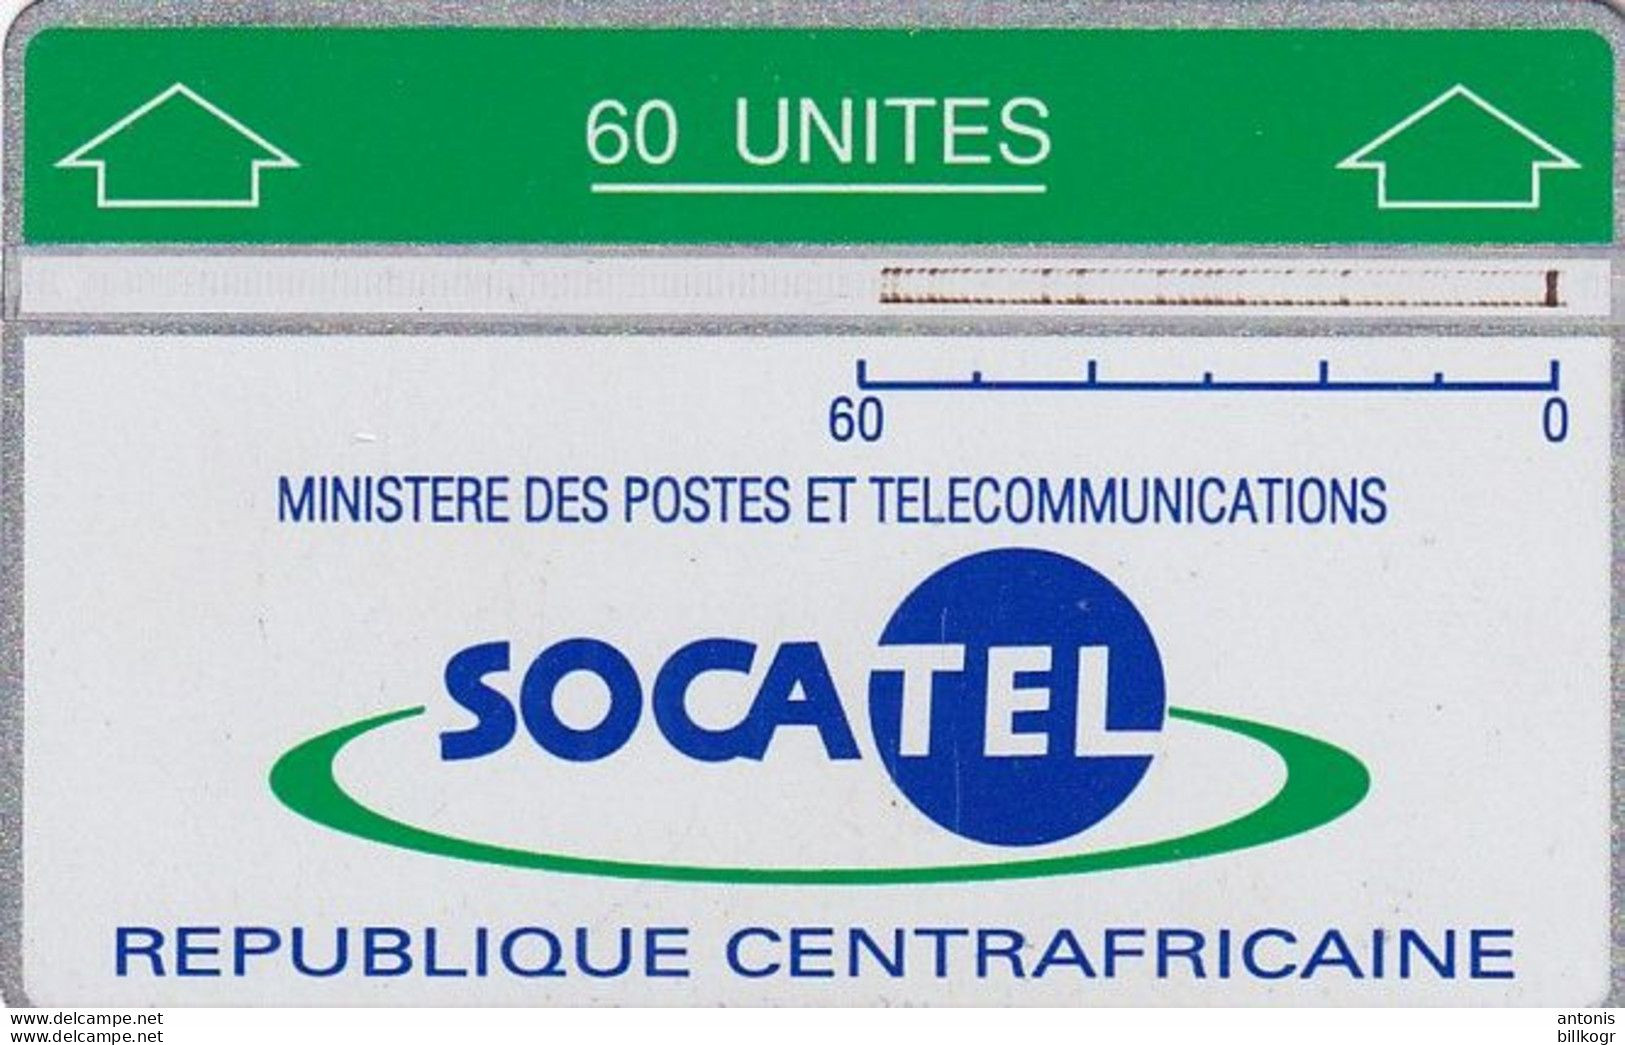 CENTRAL AFRICAN REPUBLIC(L&G) - SOCATEL Logo 60 Units, Chip SC5, CN : 207A(inverted), Tirage 6000, Used - Central African Republic